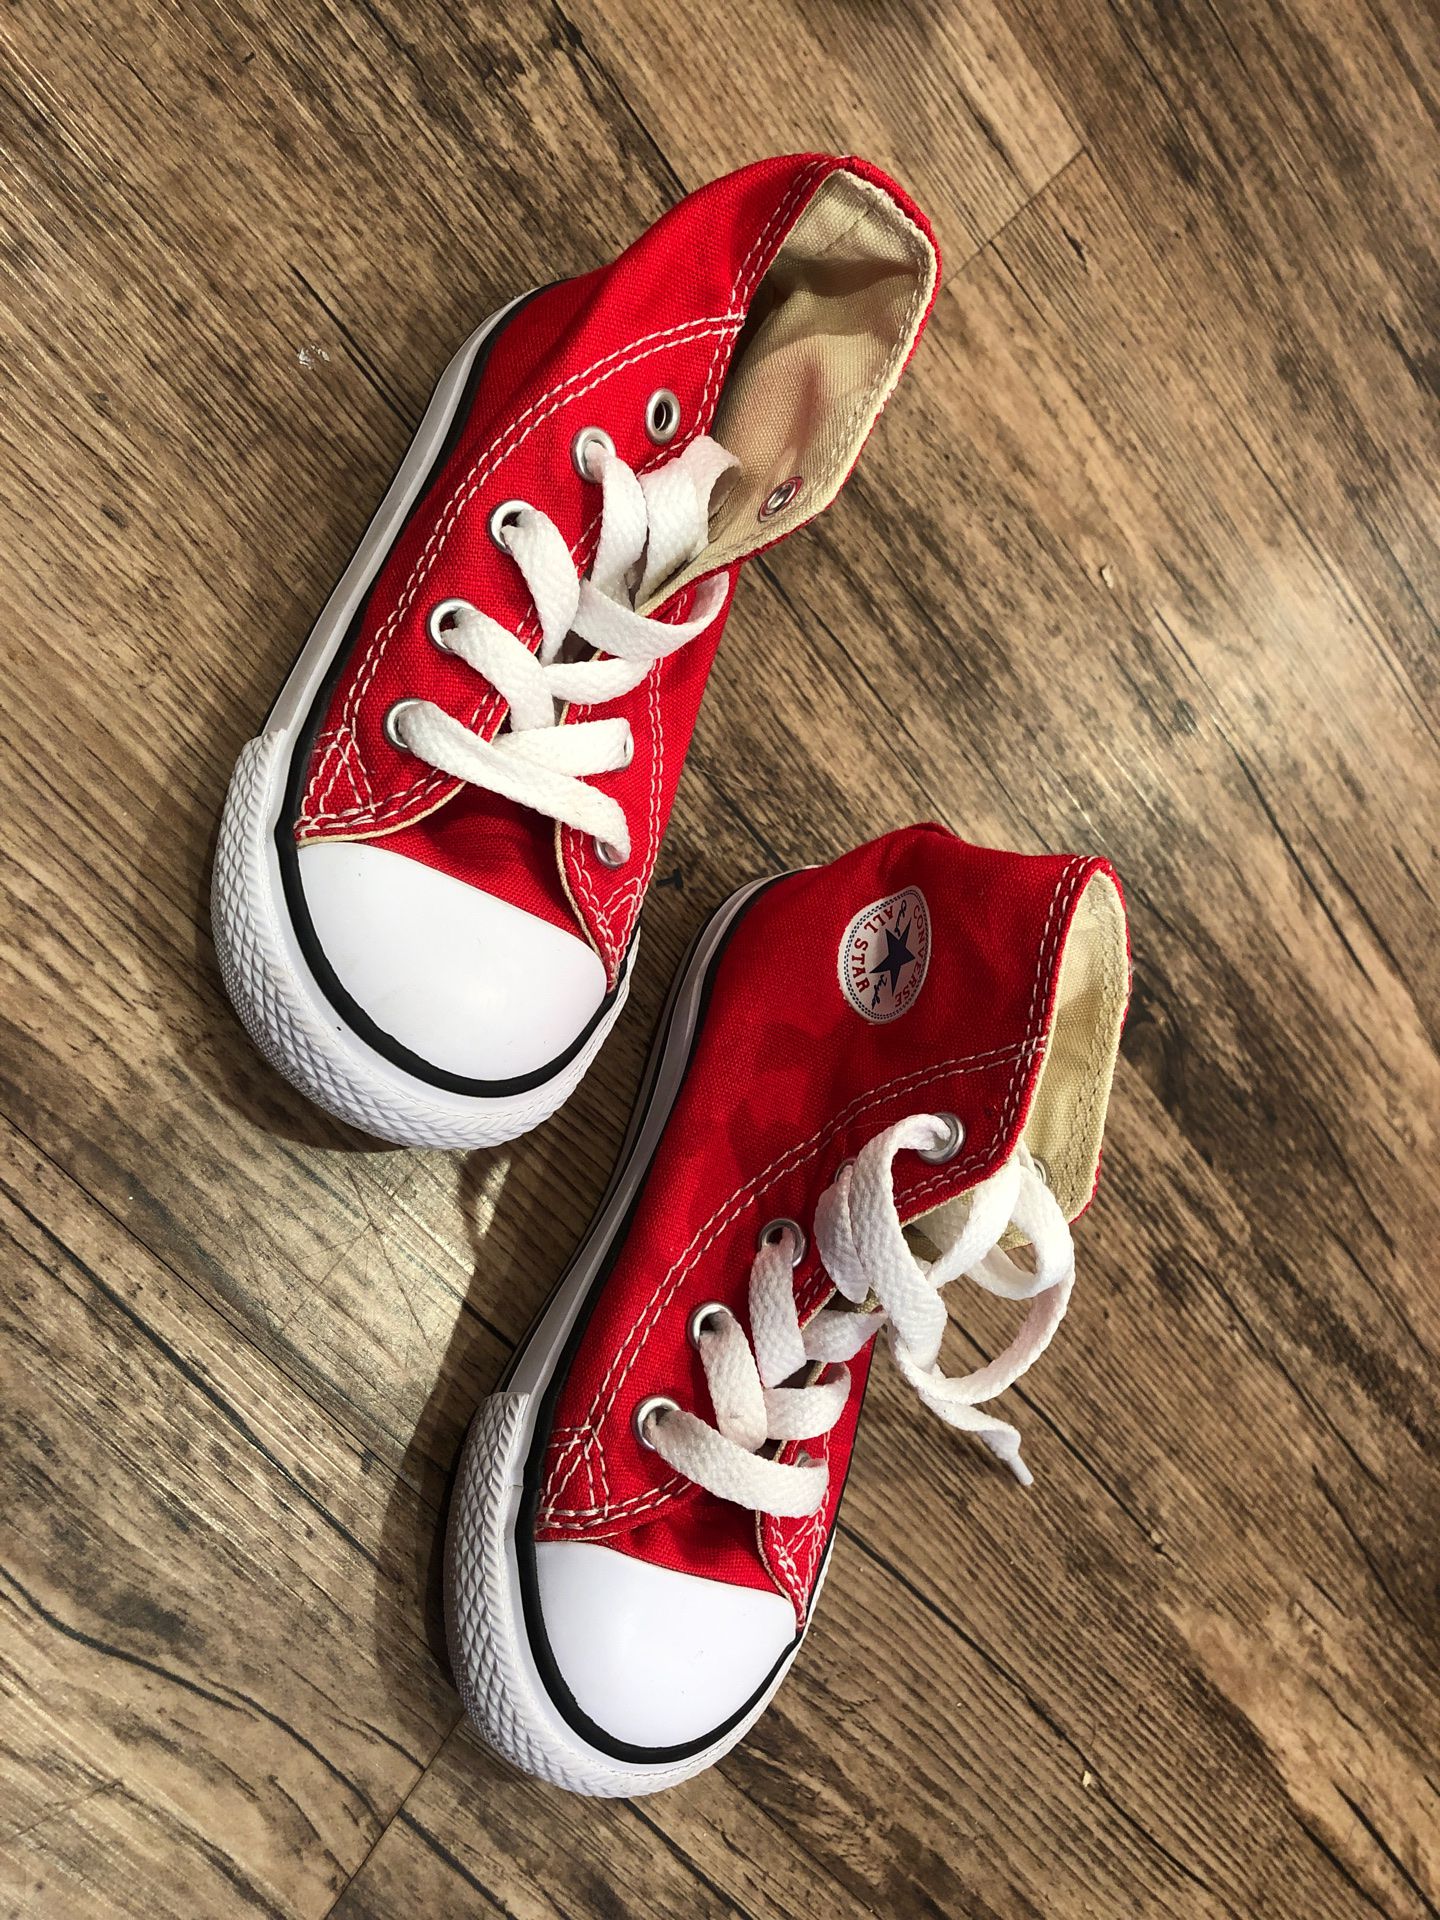 Converse All-Stars Red Size 7 in Toddler